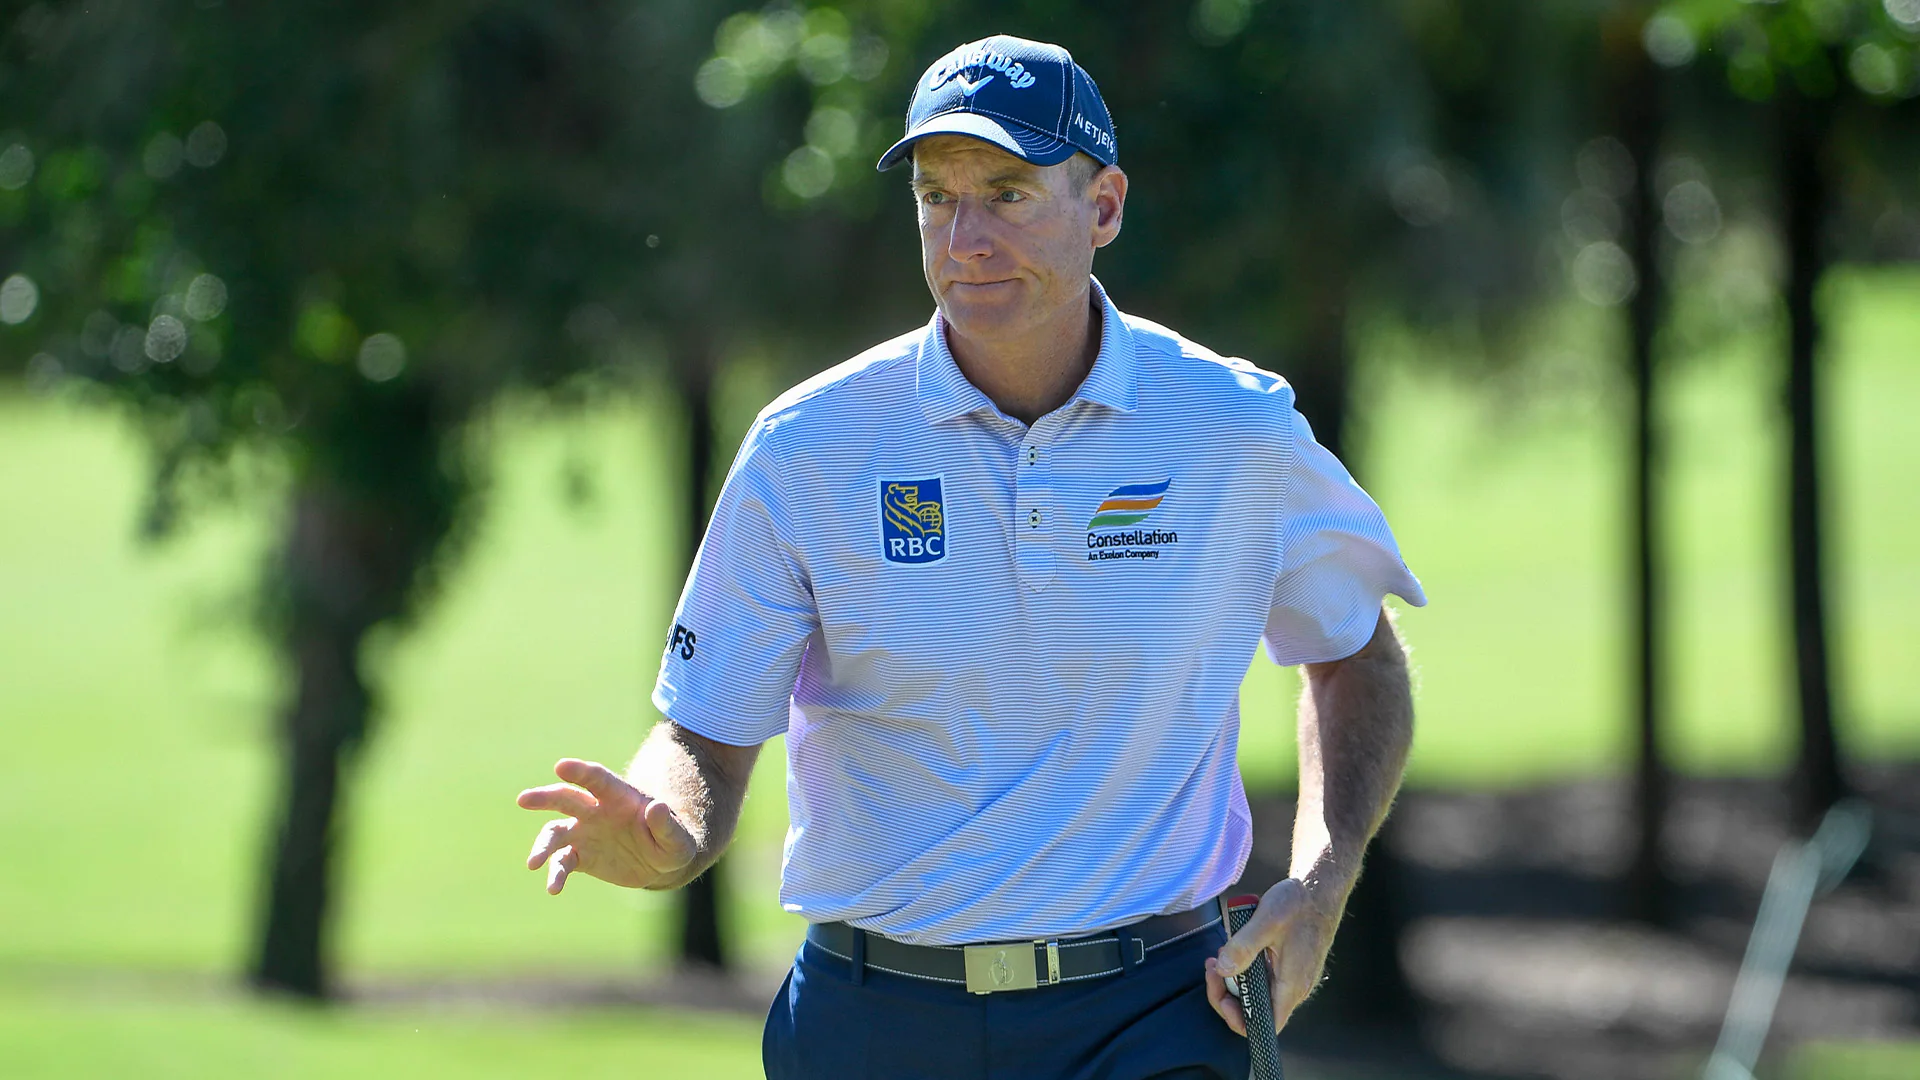 Jim Furyk shares TimberTech lead with Tim Petrovic after rain forces 36-hole Saturday